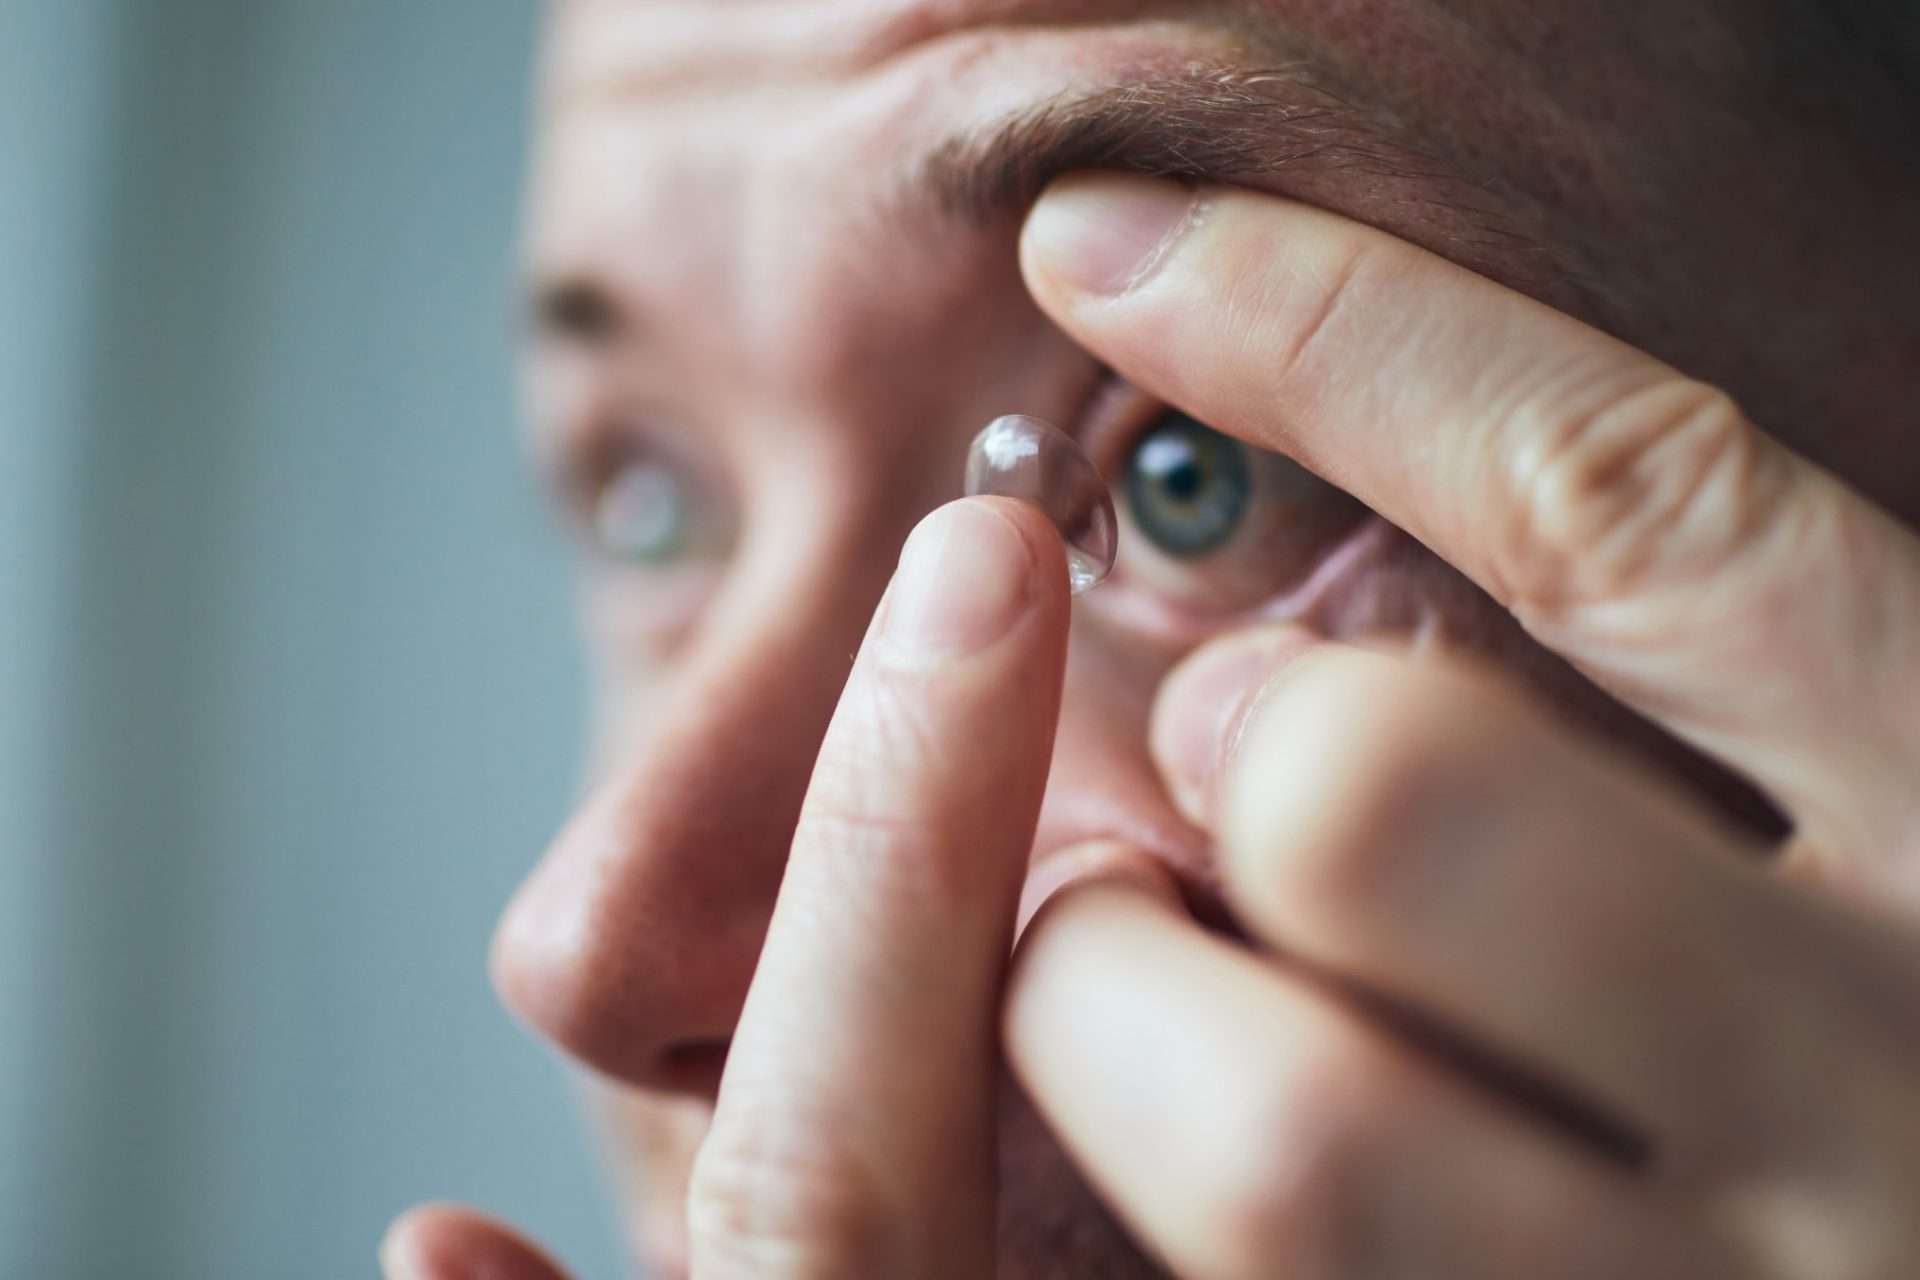 Man putting contact into his eye